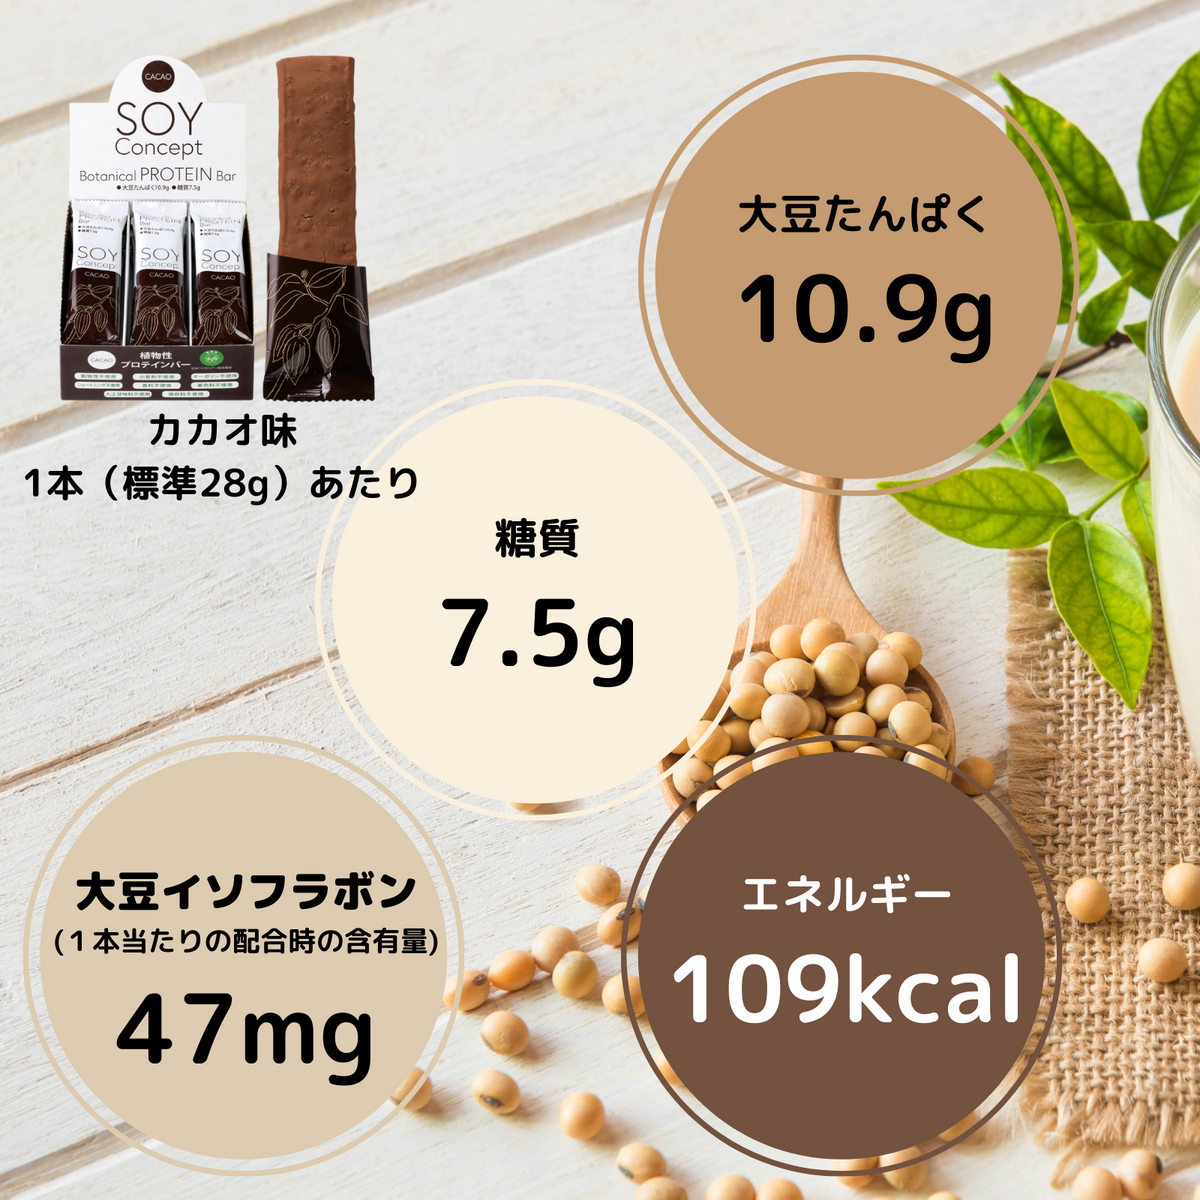 SOY Concept Cacao カカオ お得なセット